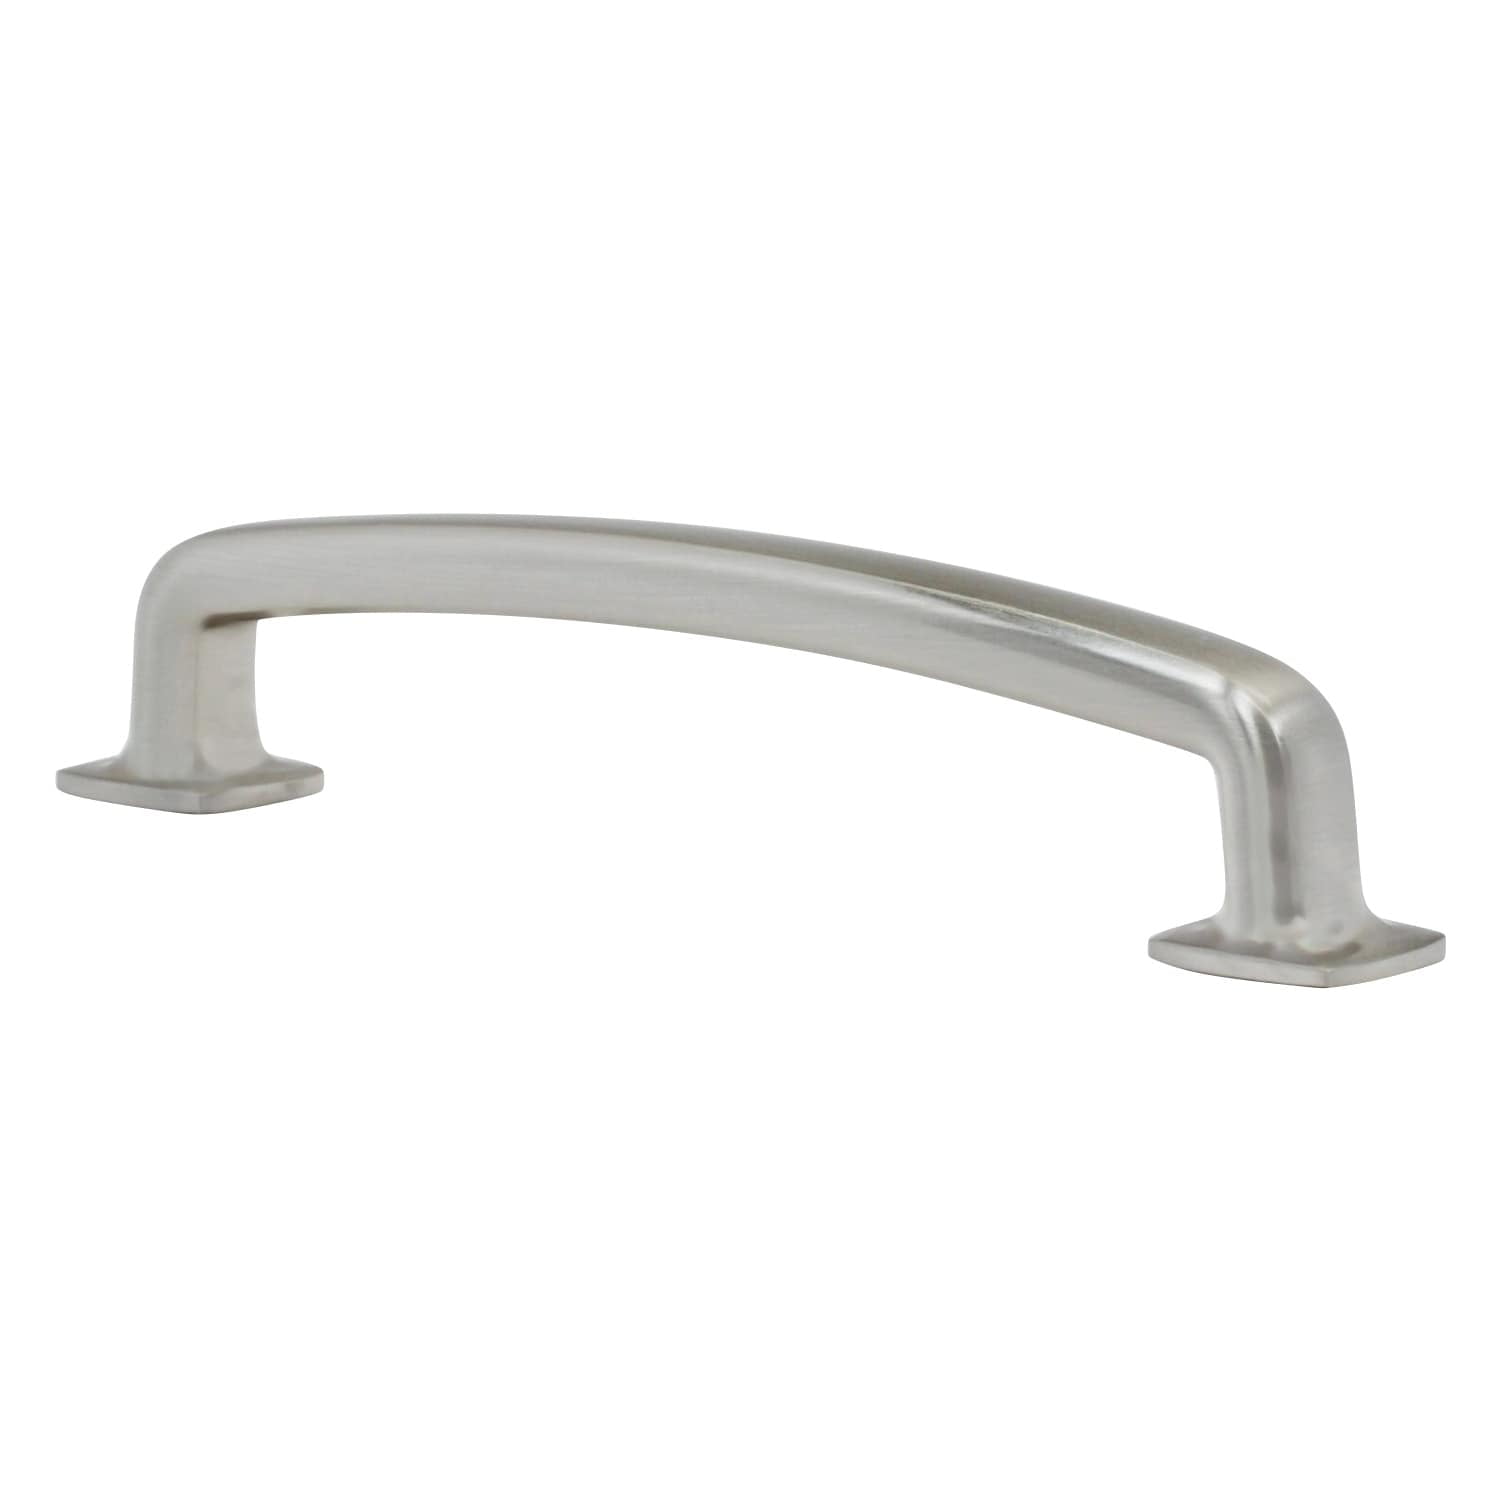 Details about   6 Excellent New Solid Metal Amerock Brushed Brush Nickel Drawer/Cabinet Pulls 